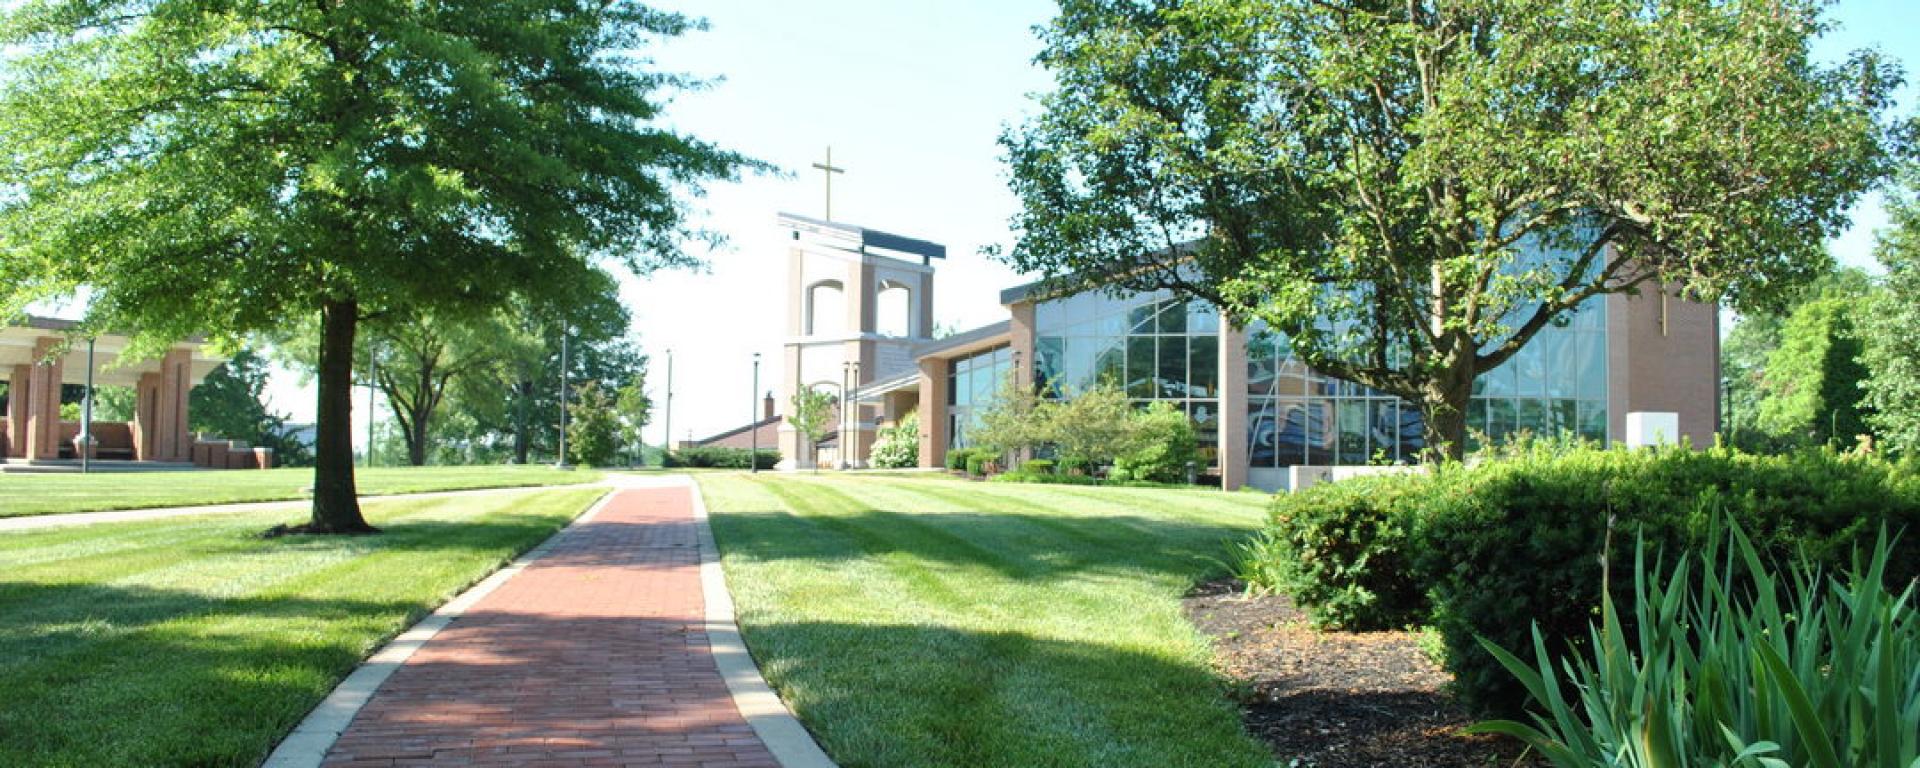 walkway and landscaping outside chapel